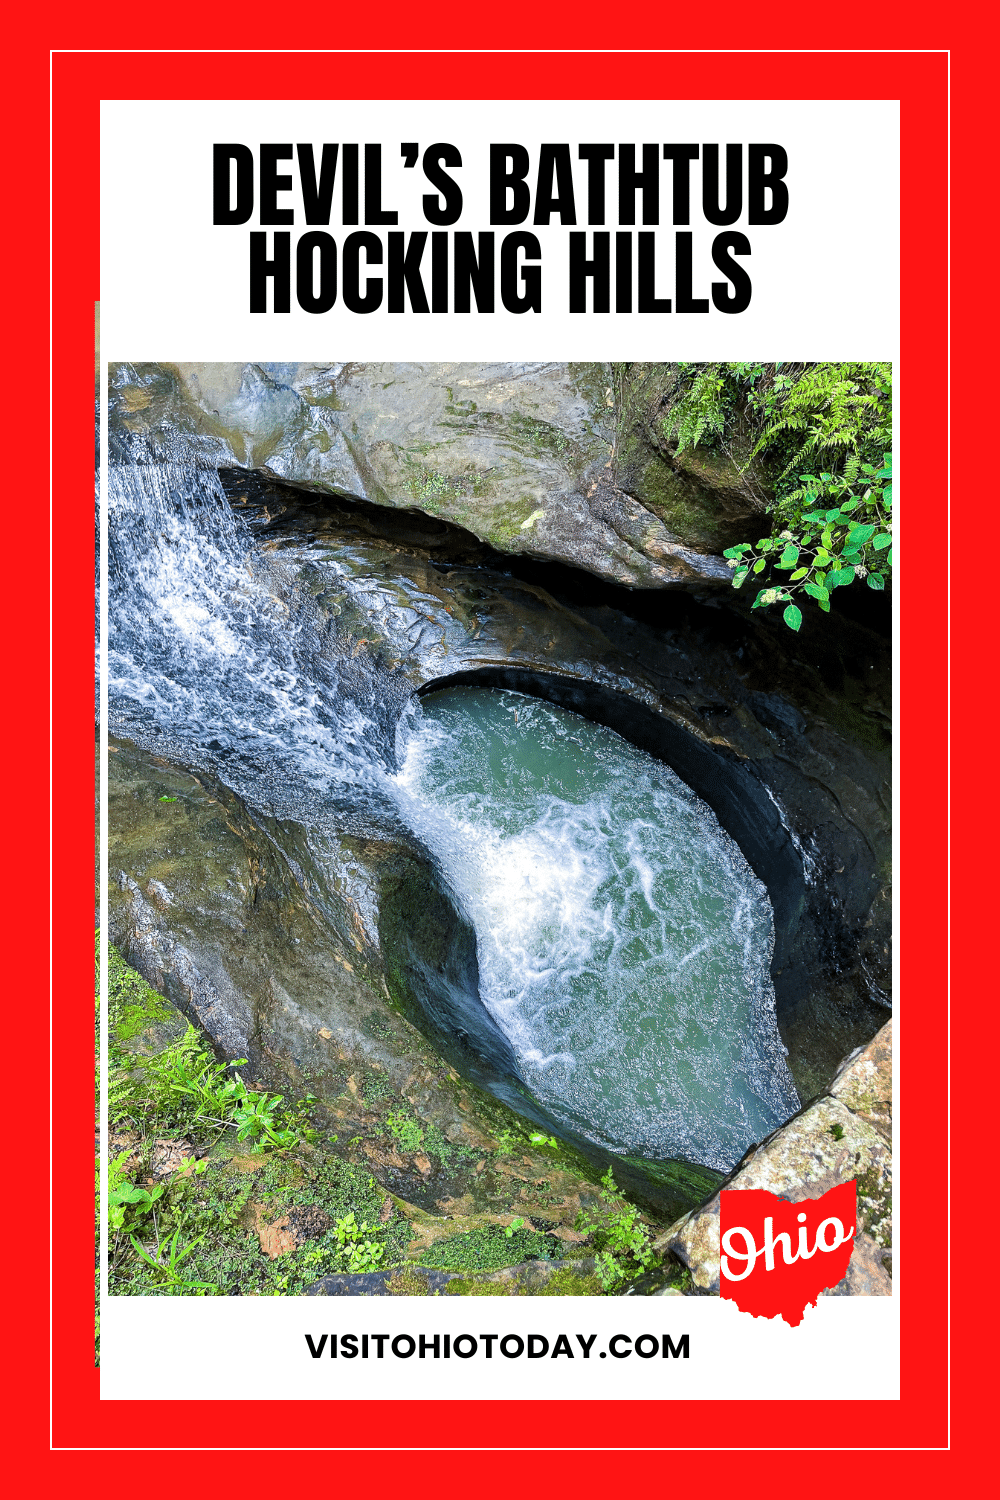 The Devil's Bathtub is a unique place that is found in Hocking Hills State Park. It received this name as it is a pool that froths along the stream and it leads down to Old Man’s Cave.